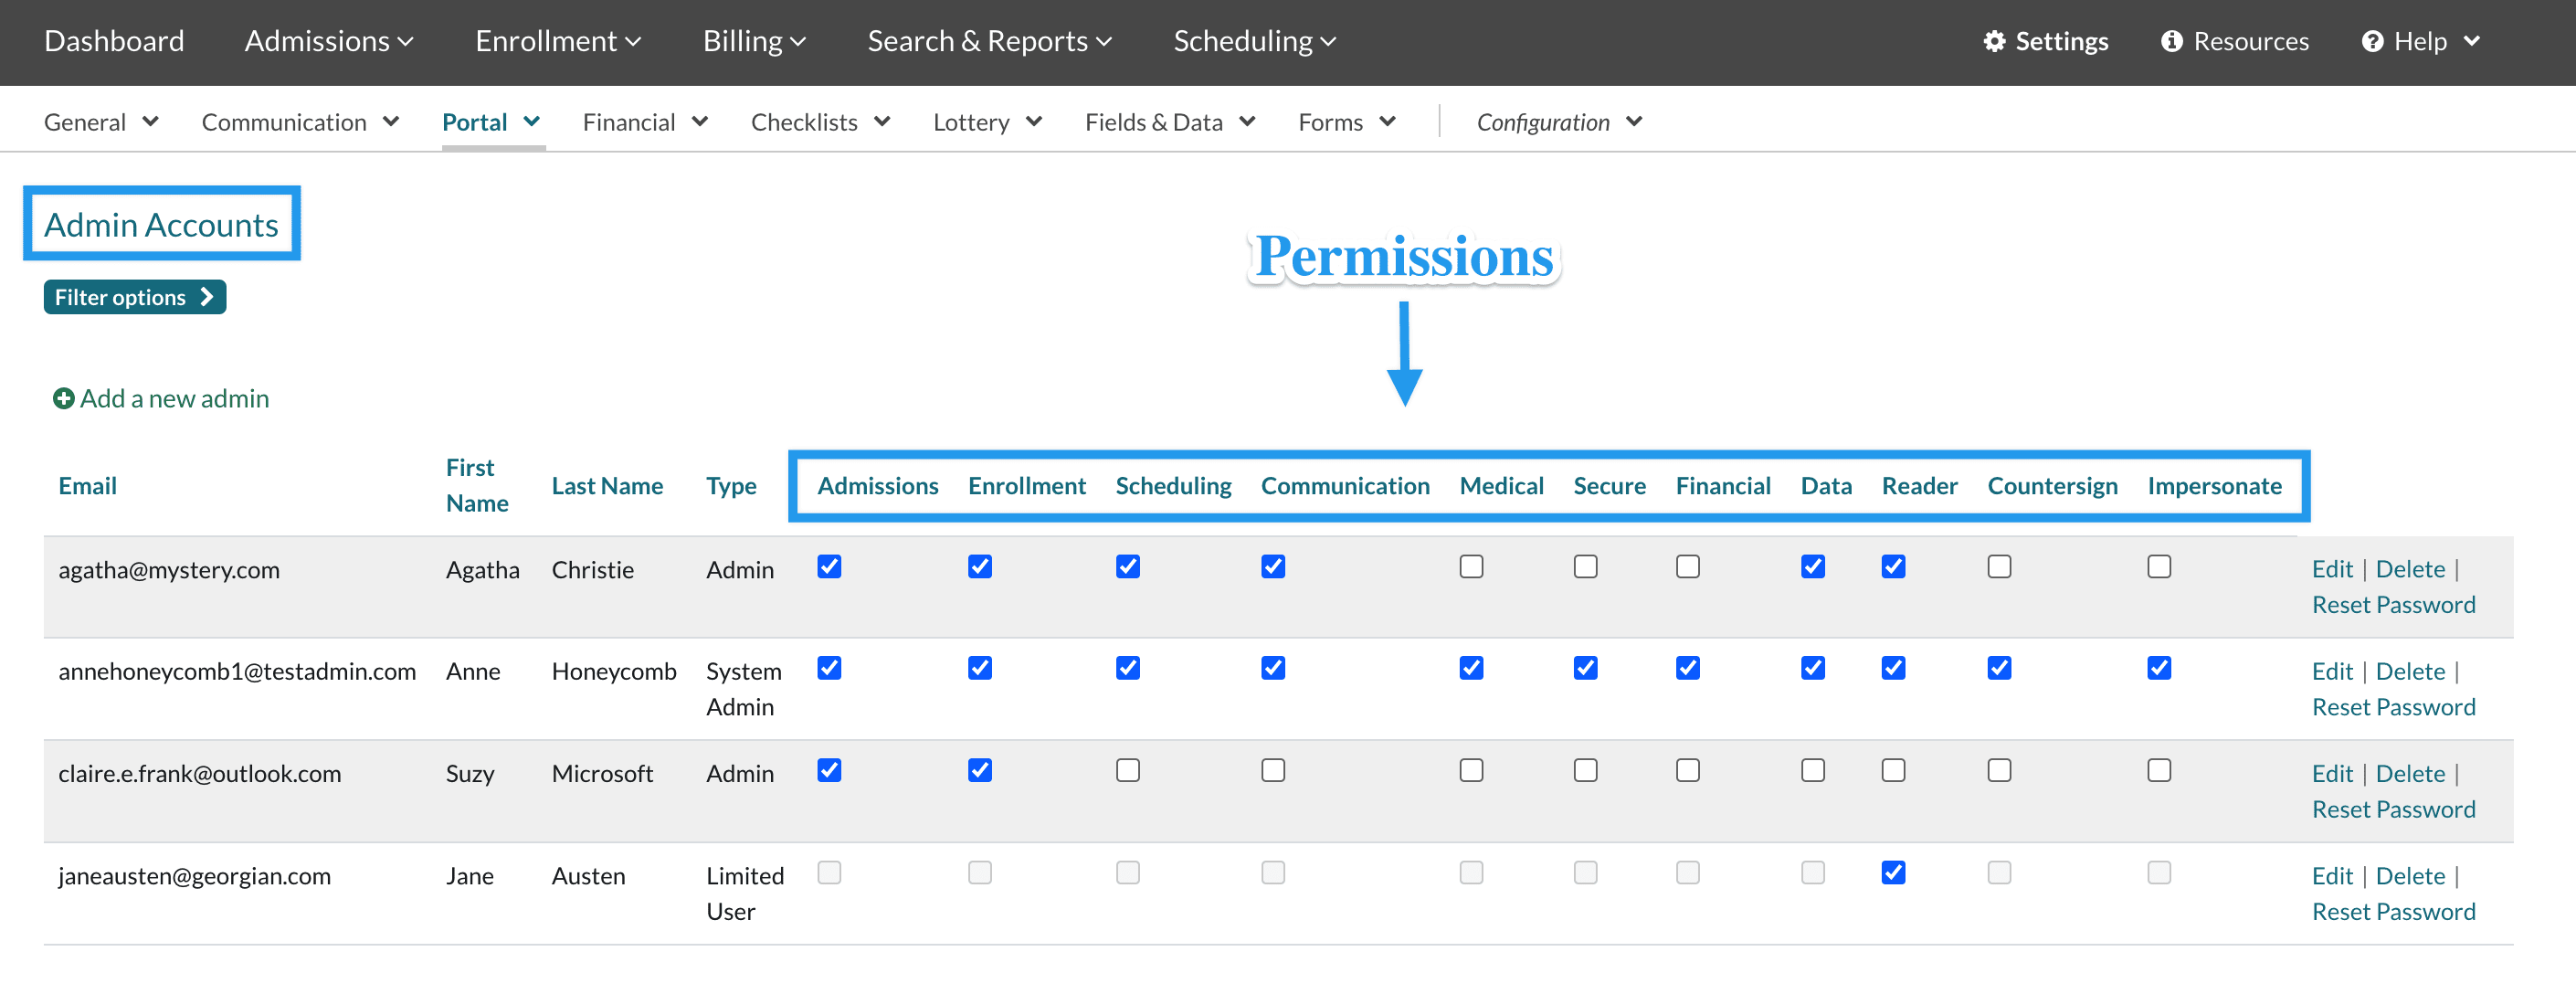 Admin Portal accounts page highlighting the Permissions area.